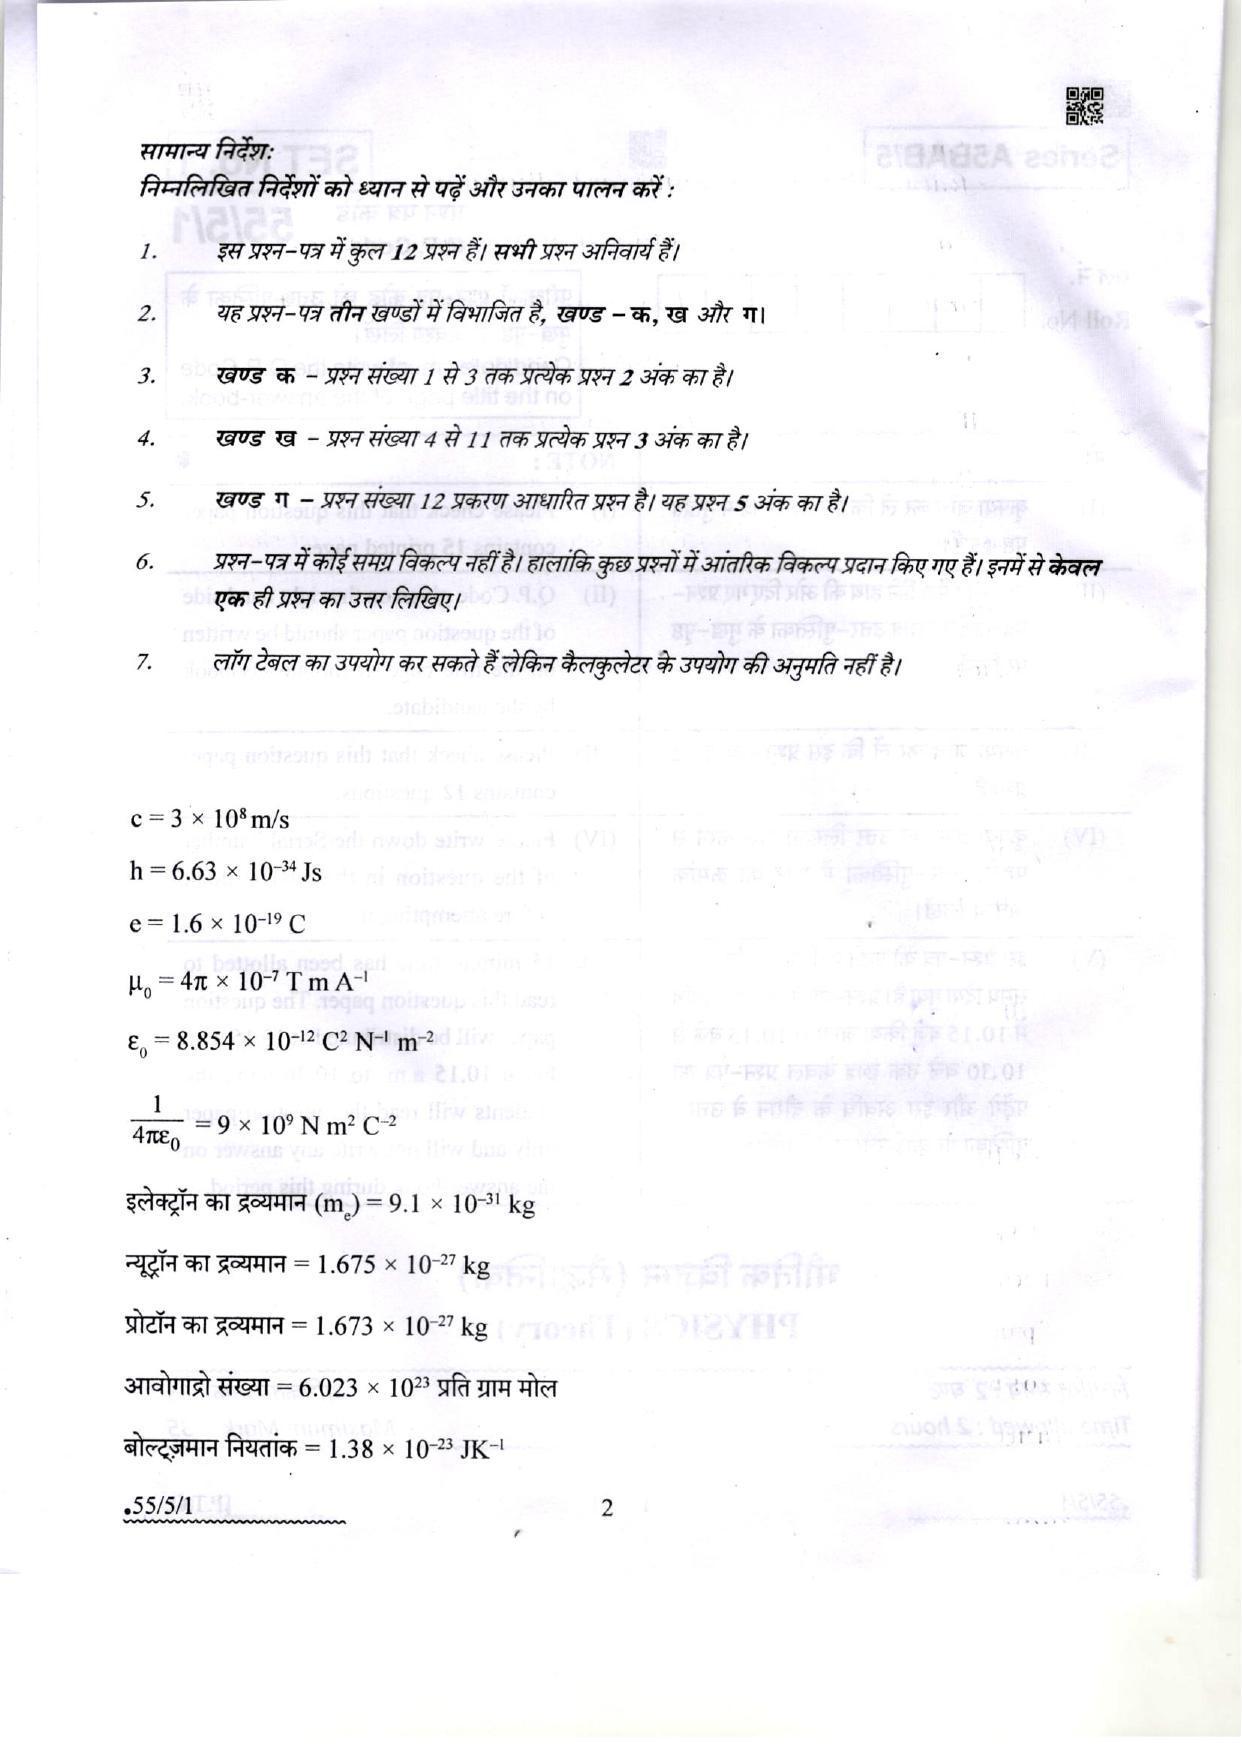 CBSE Class 12 55-5-1 Physics 2022 Question Paper - Page 2